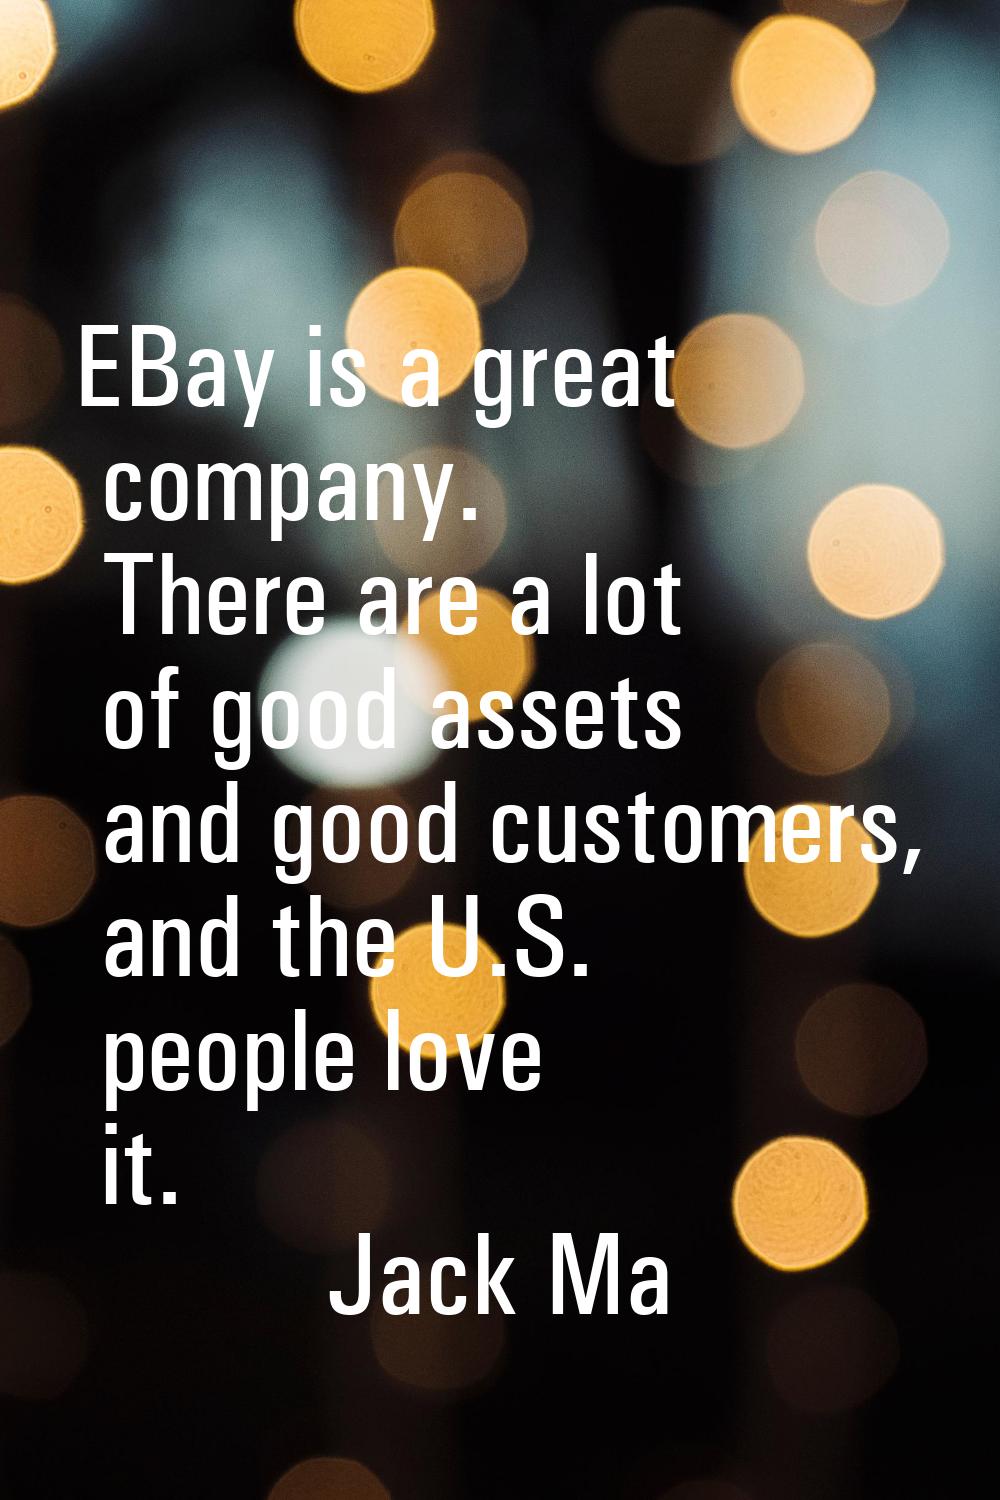 EBay is a great company. There are a lot of good assets and good customers, and the U.S. people lov